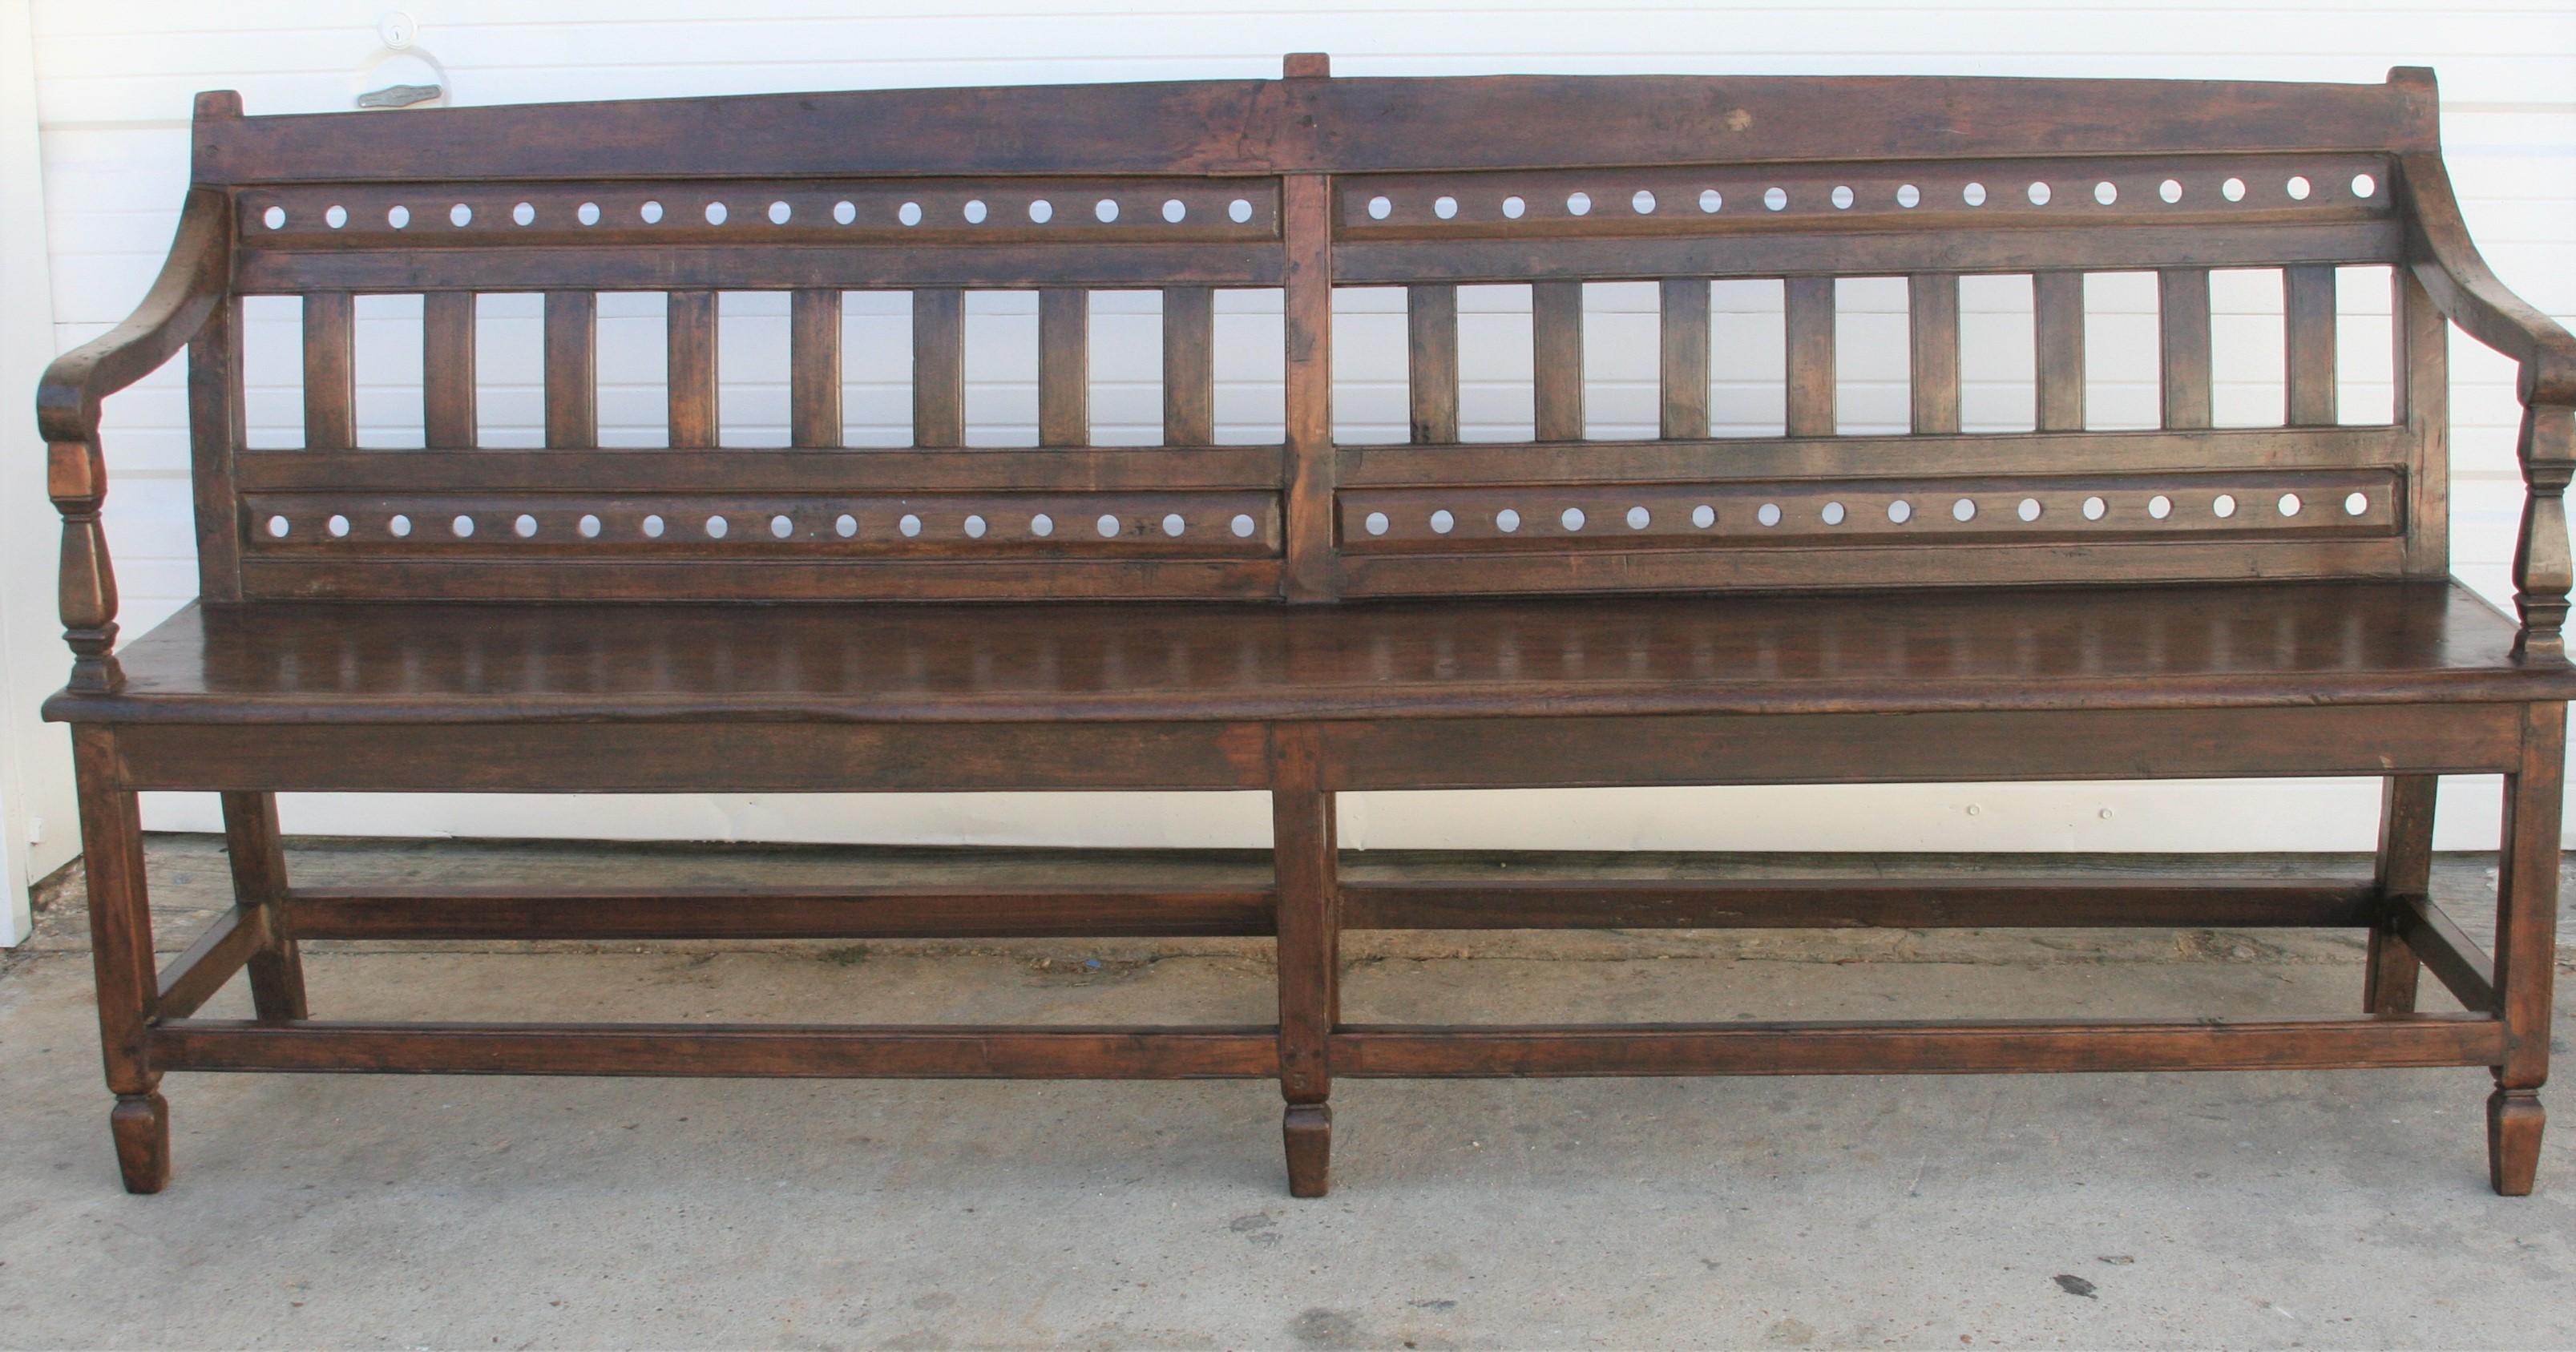 Late 19th century solid teak wood bench from a colonial home. Inimitable in style and unmatched in quality. This long bench has six solid legs with trays holding them and a seat almost made from one plank of wood and arm rests on both sides with